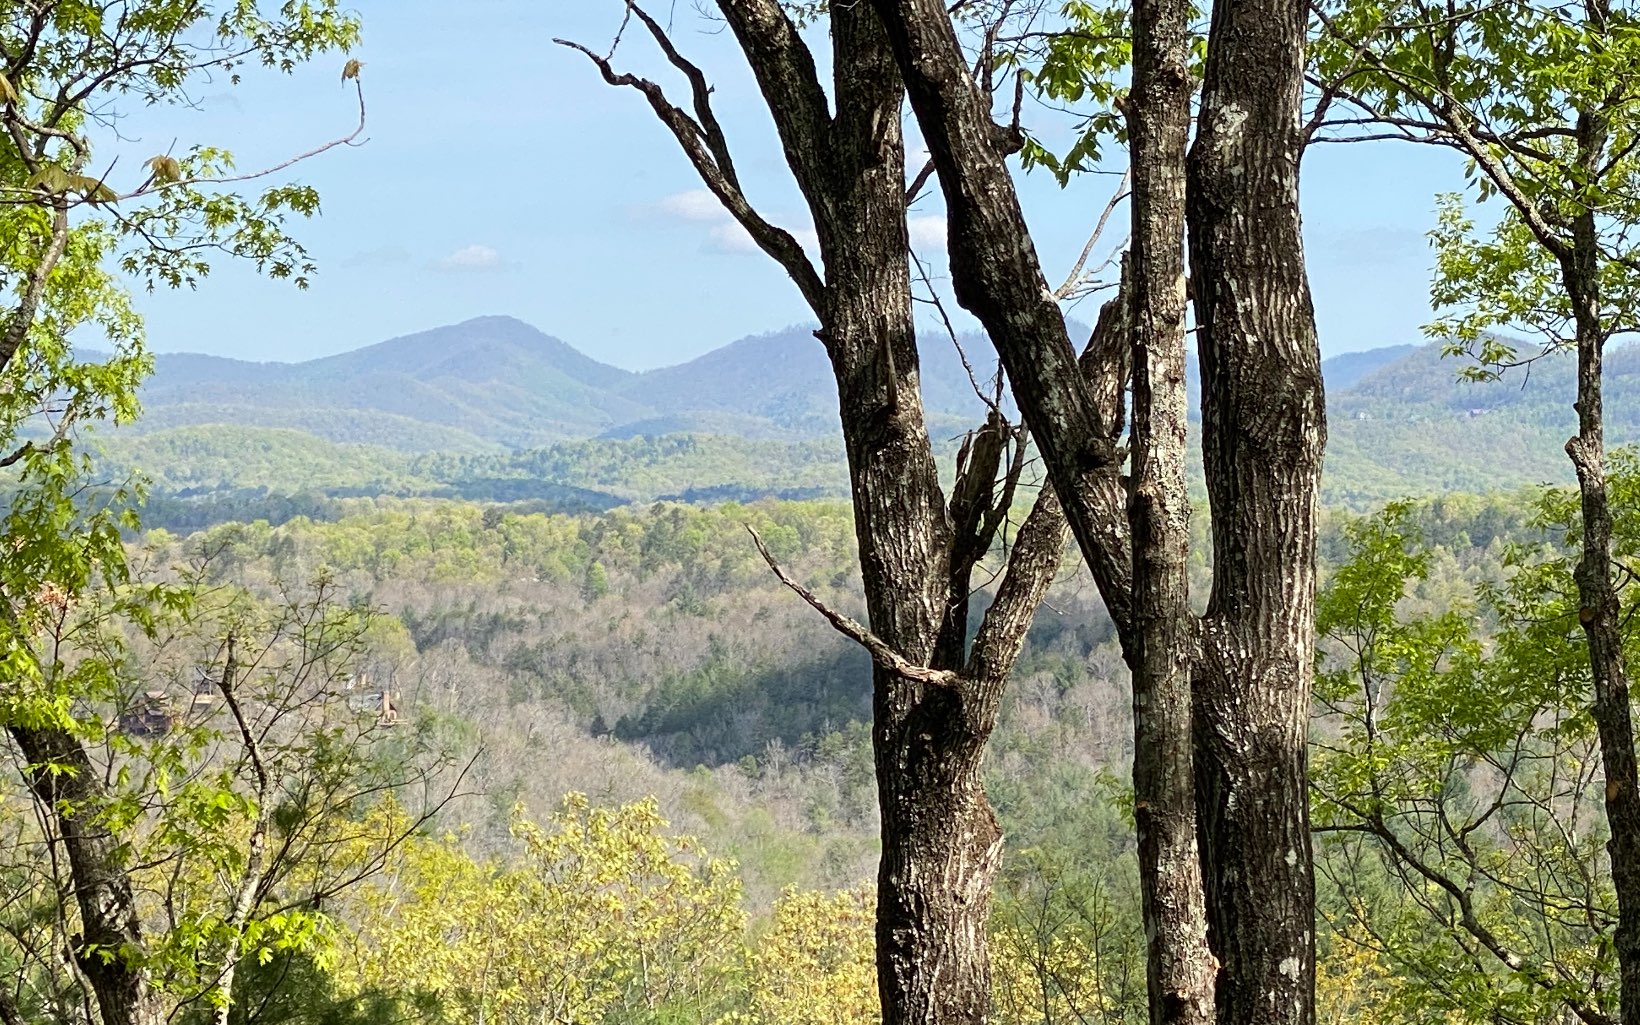 Spectacular year round views from this 2.95 acre lot! Welcome to Raven Ridge. This mountain community is nestled in the heart of the Appalachian Mountains w/ easy access to Blue Ridge, Blairsville and Murphy. Upscale cabins already built in this growing development. Underground utilities & community water available.